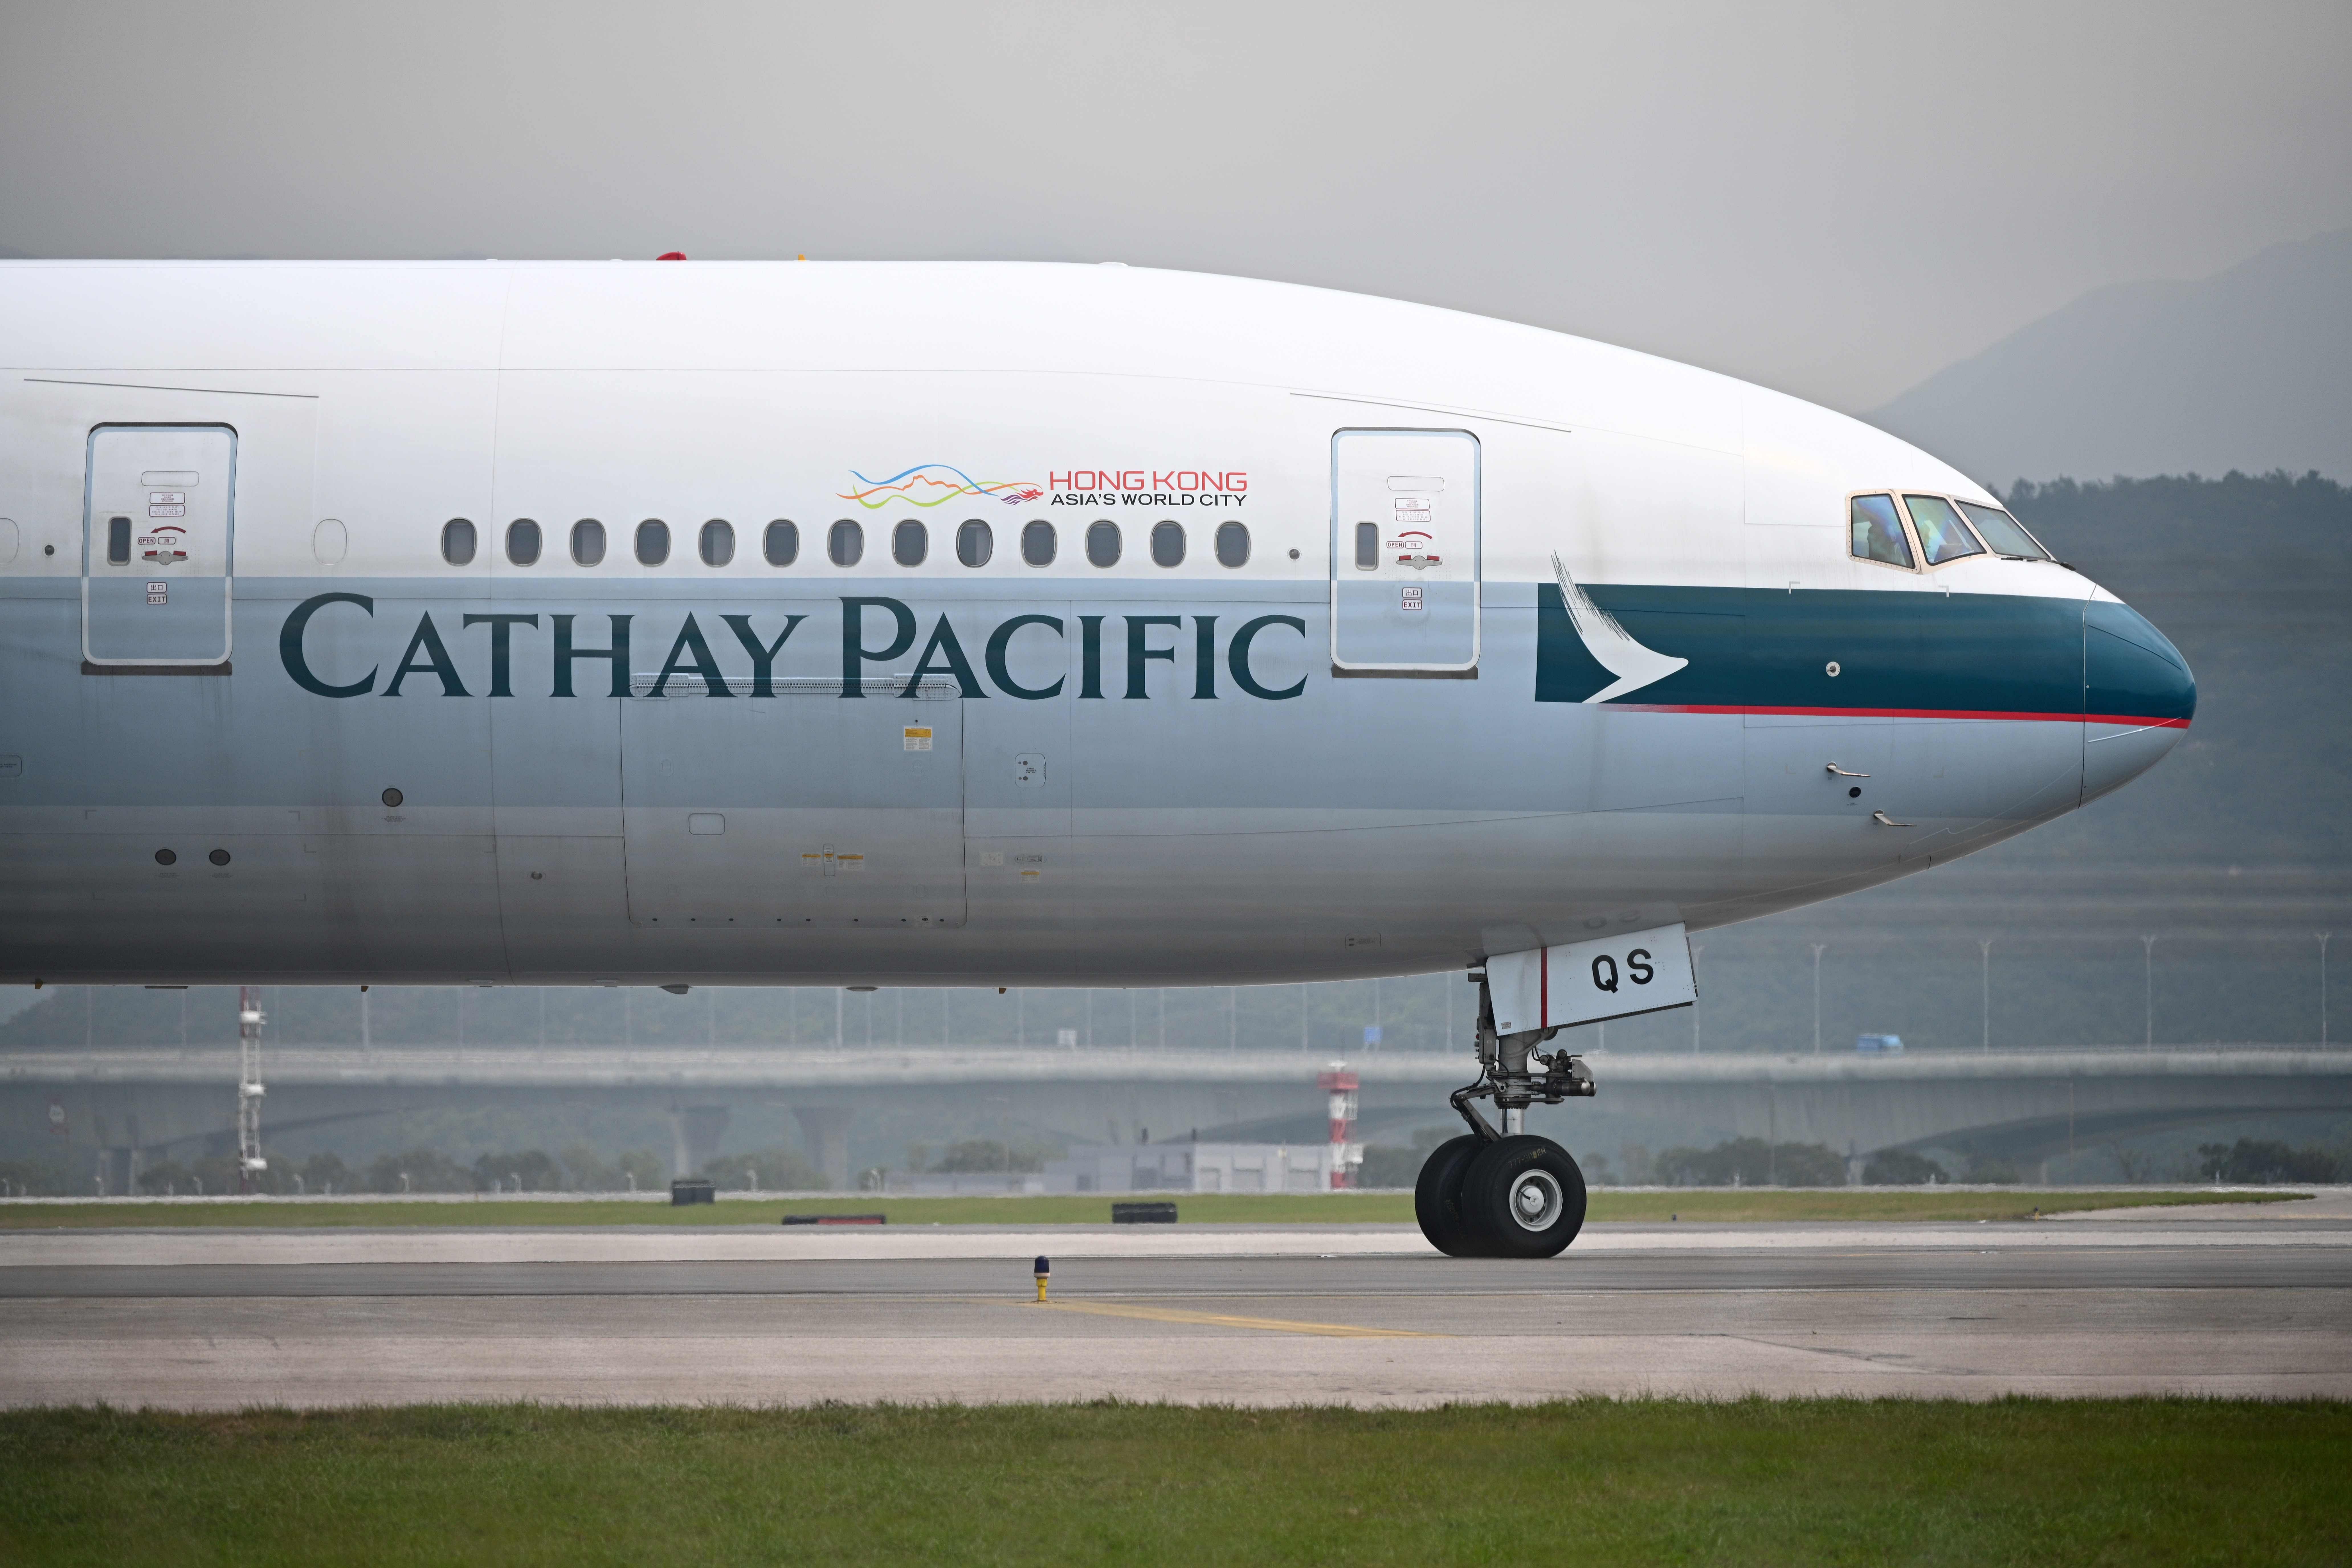 In this file photo taken on March 13, 2019, a Cathay Pacific passenger plane prepares to take off from Hong Kong's international airport. (Credit AFP)